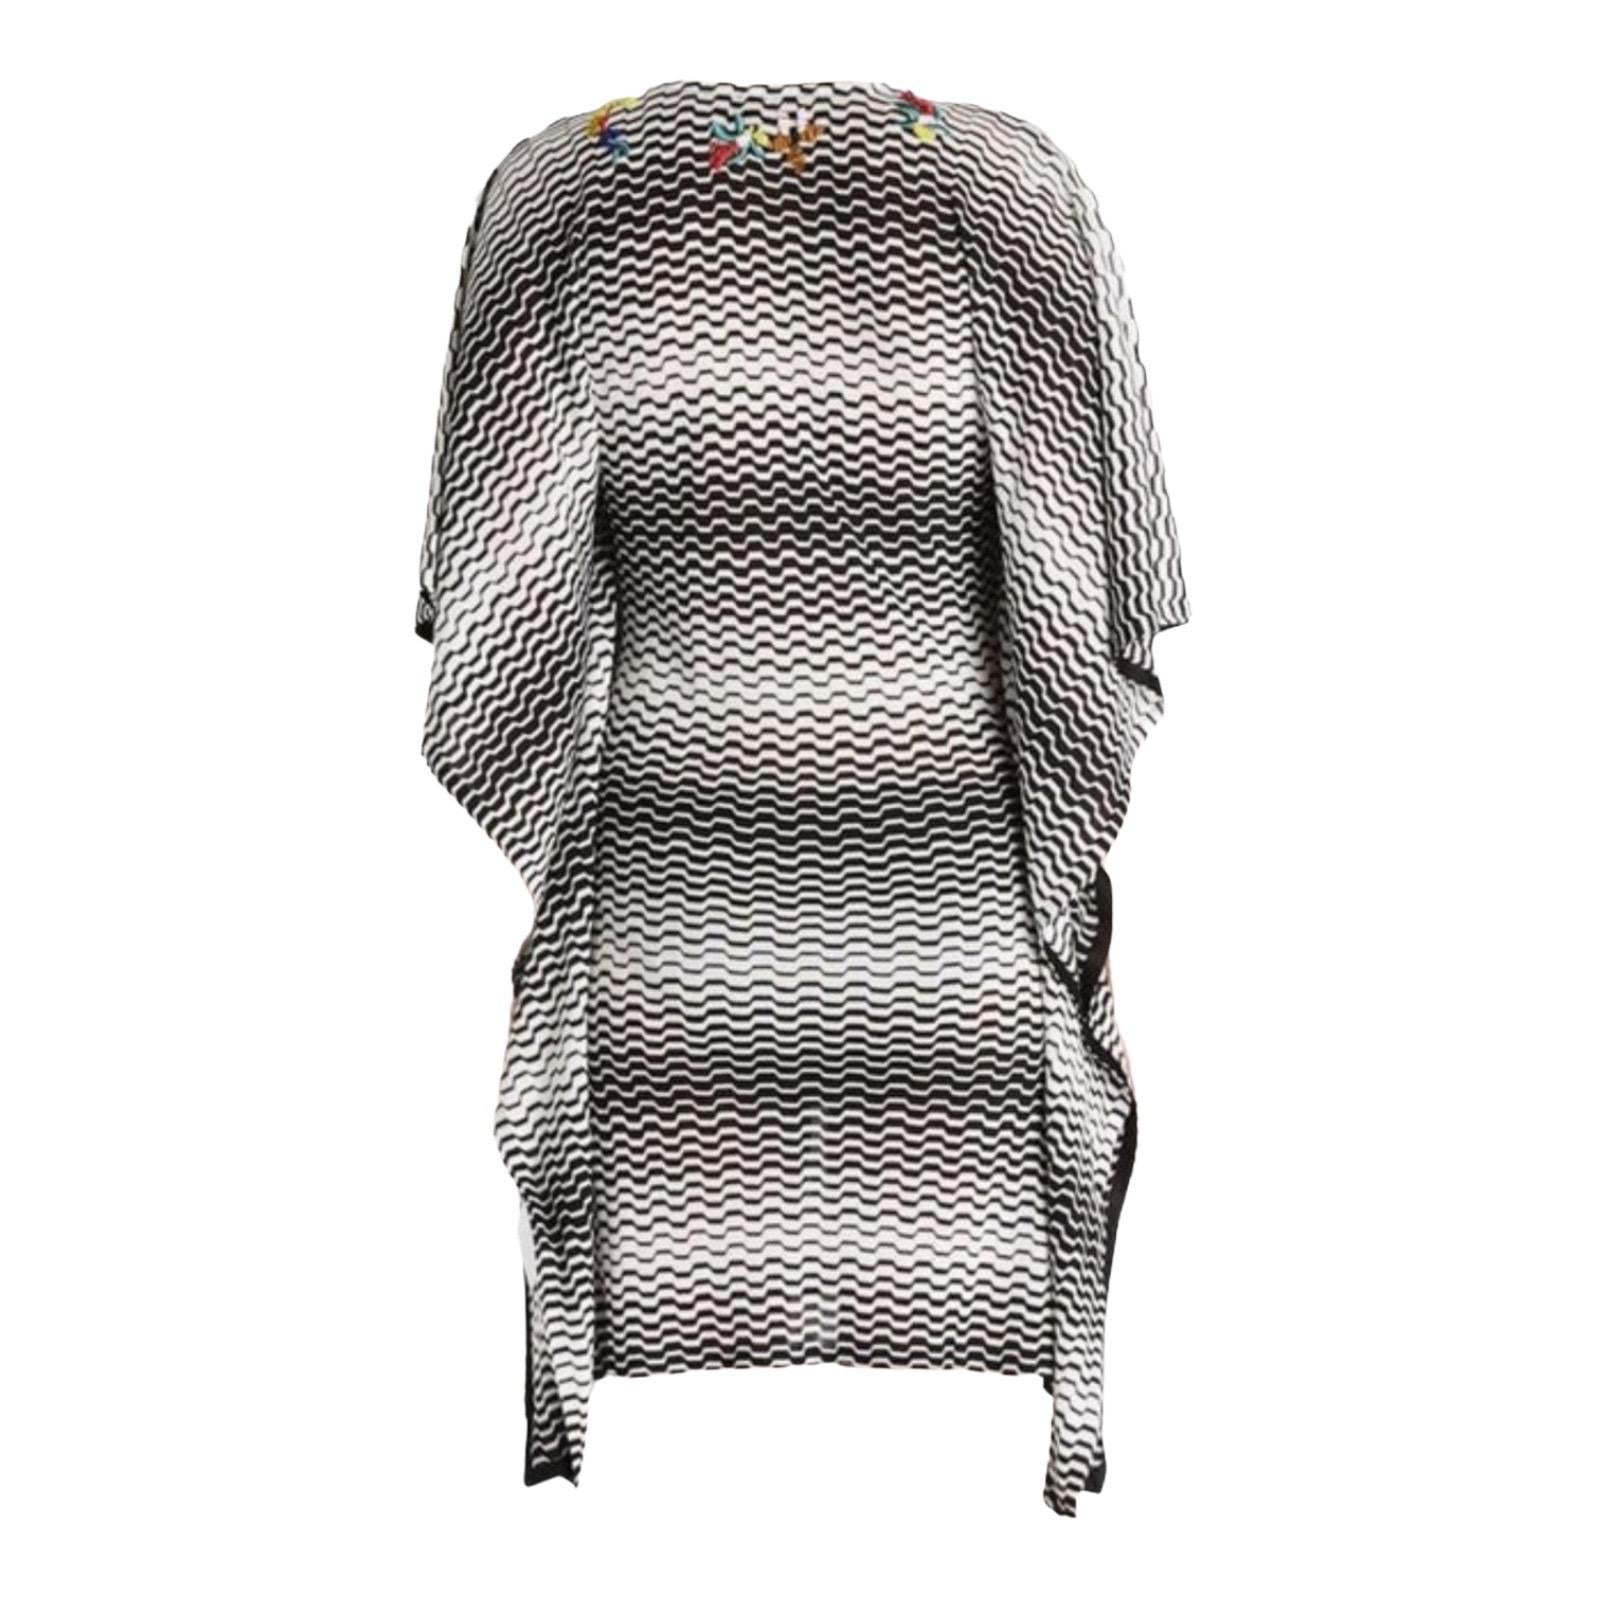 
Missoni's kaftan has been crafted in Italy using the label's signature crochet-knit technique. This piece is so versatile, its relaxed shape makes it perfect for slipping on over a bikini or to wear it as a casual dress or over a leggings or